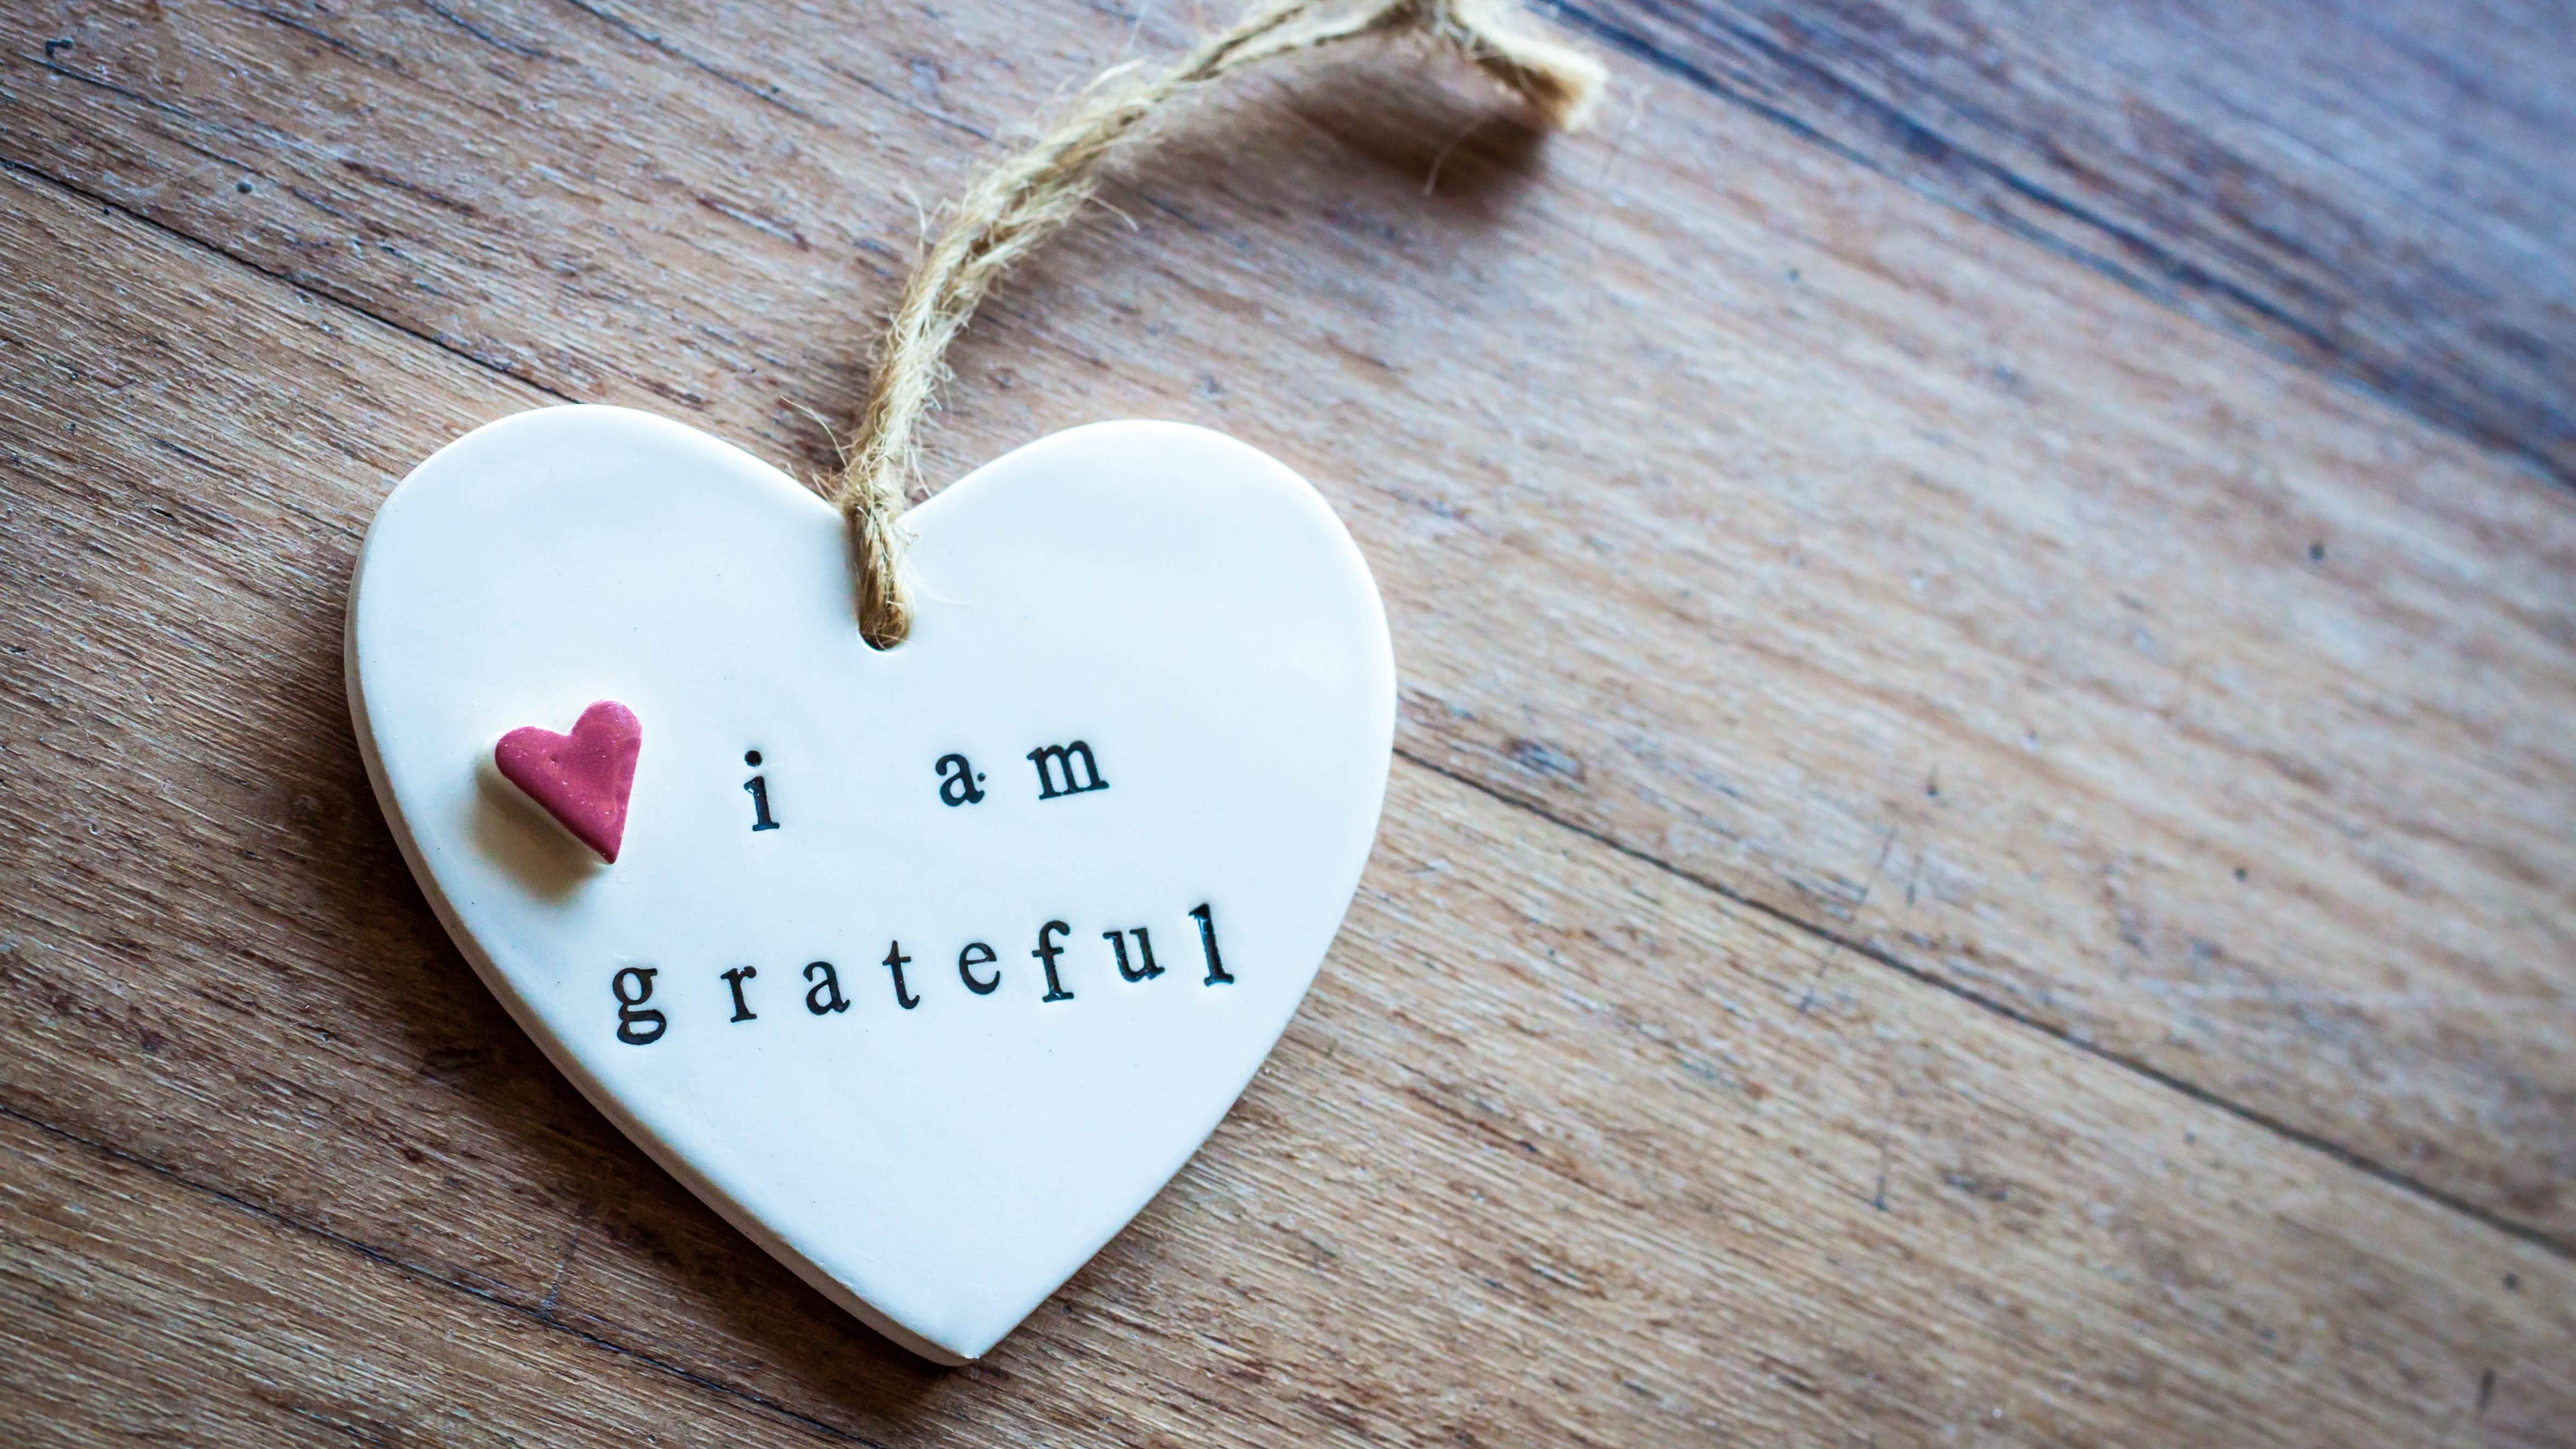 What You’re Getting Wrong About Gratitude